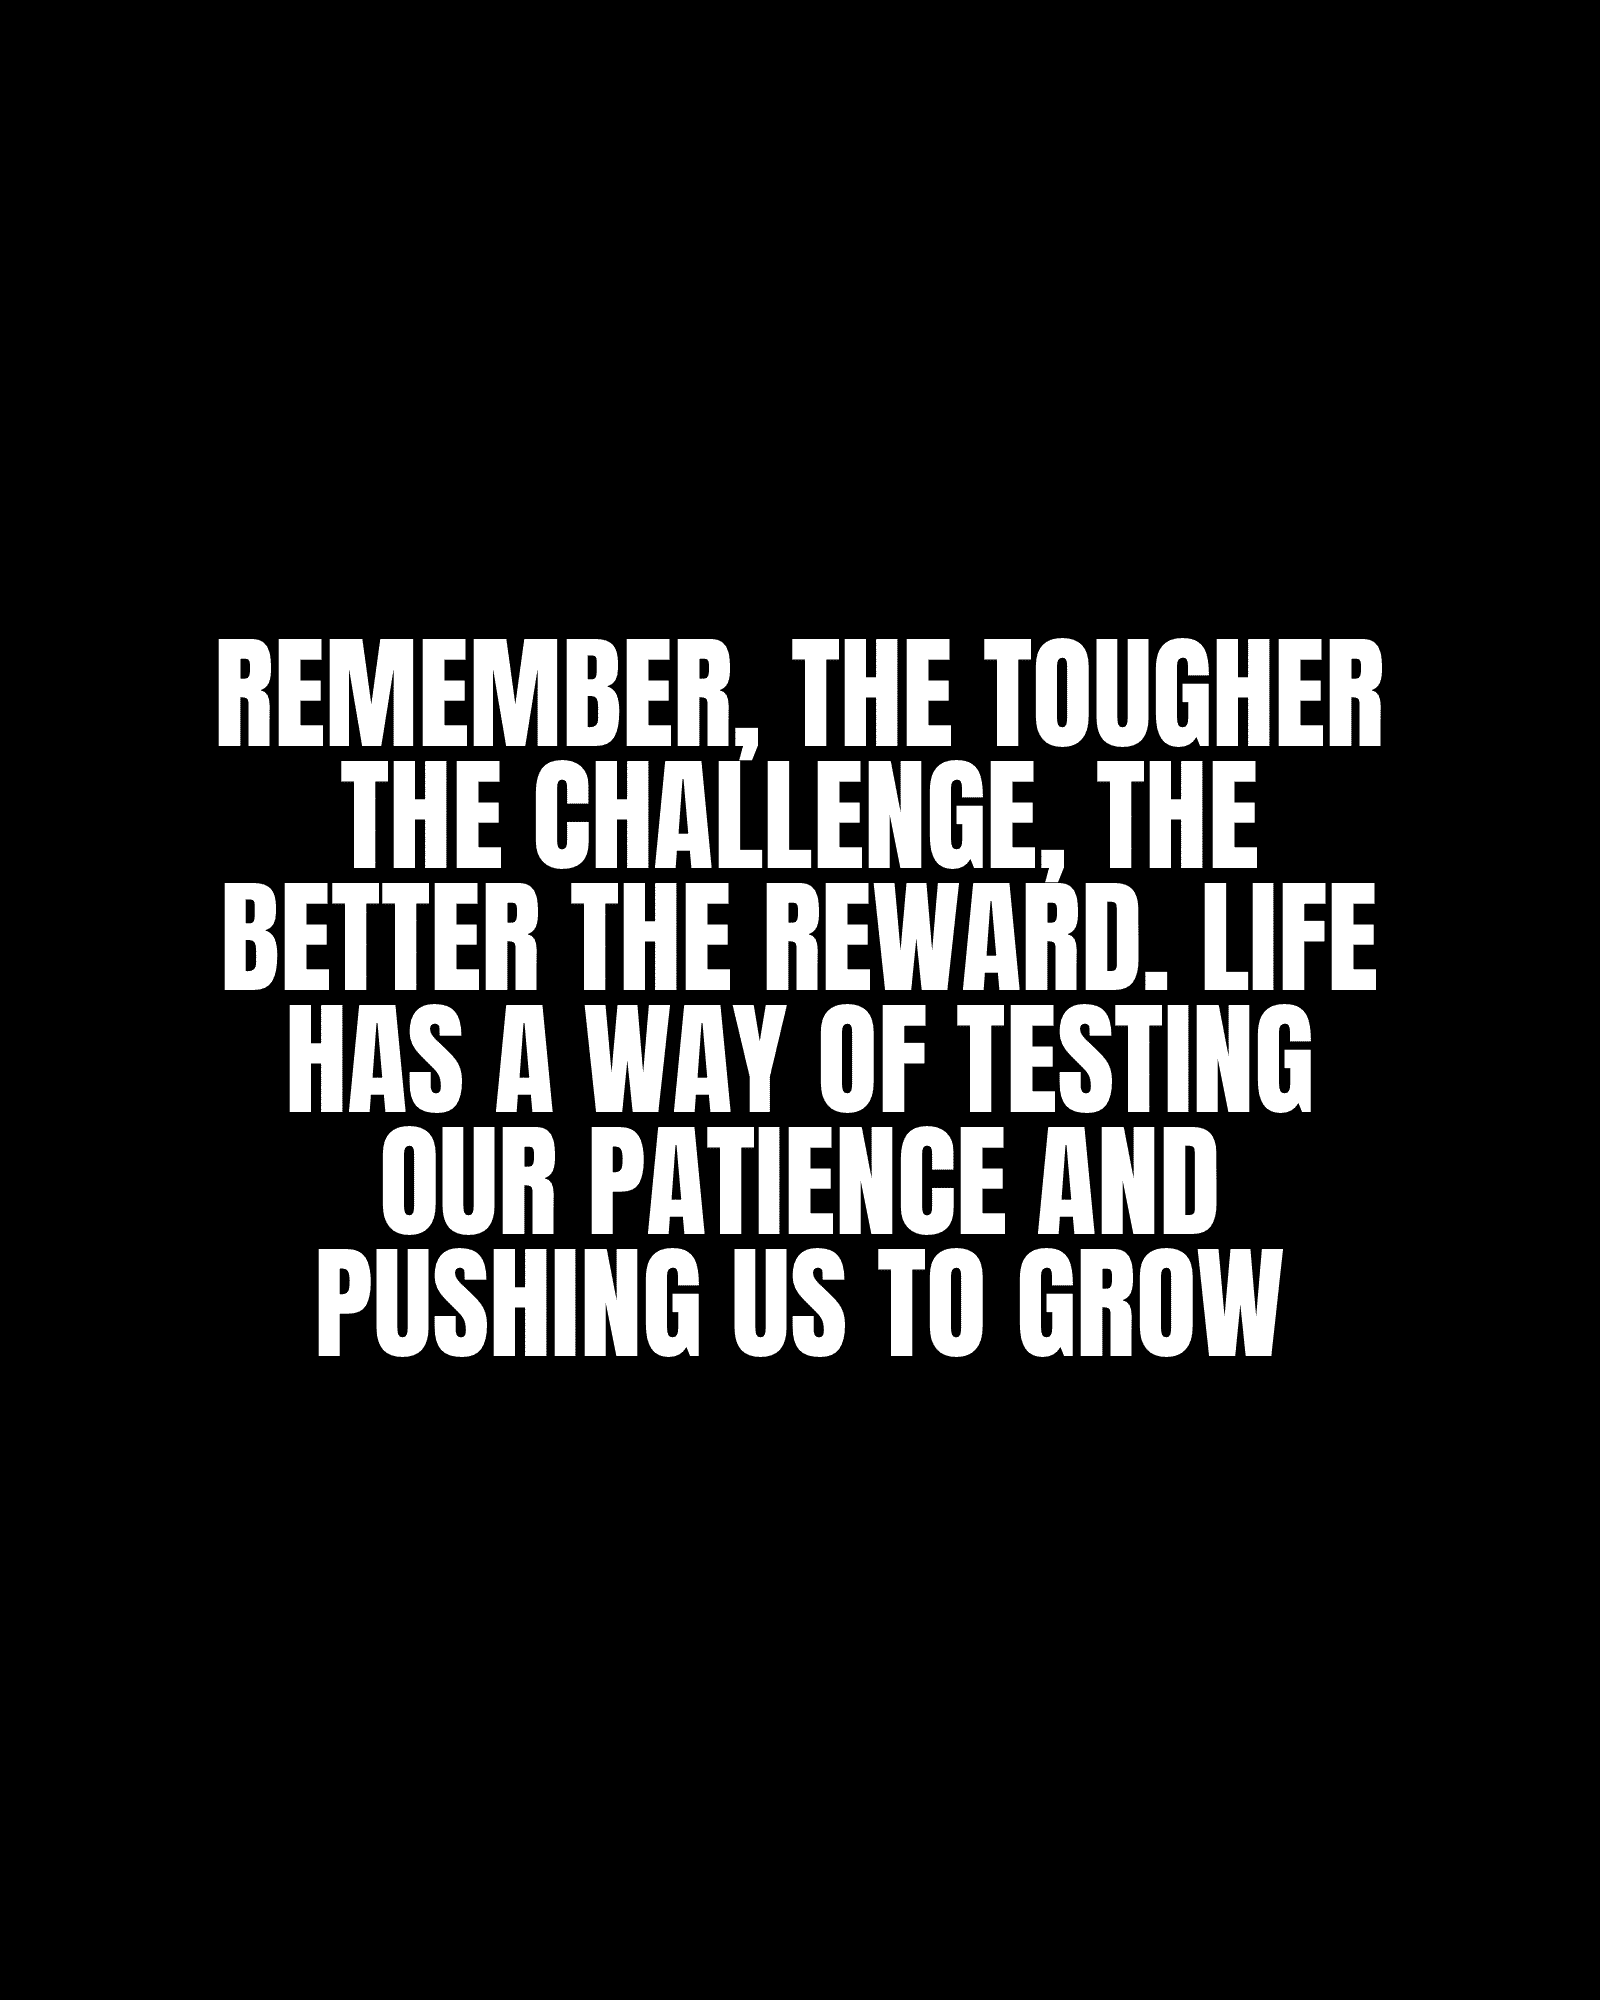 Remember, the tougher the challenge, the better the reward. Life has a way of testing our patience and pushing us to grow.